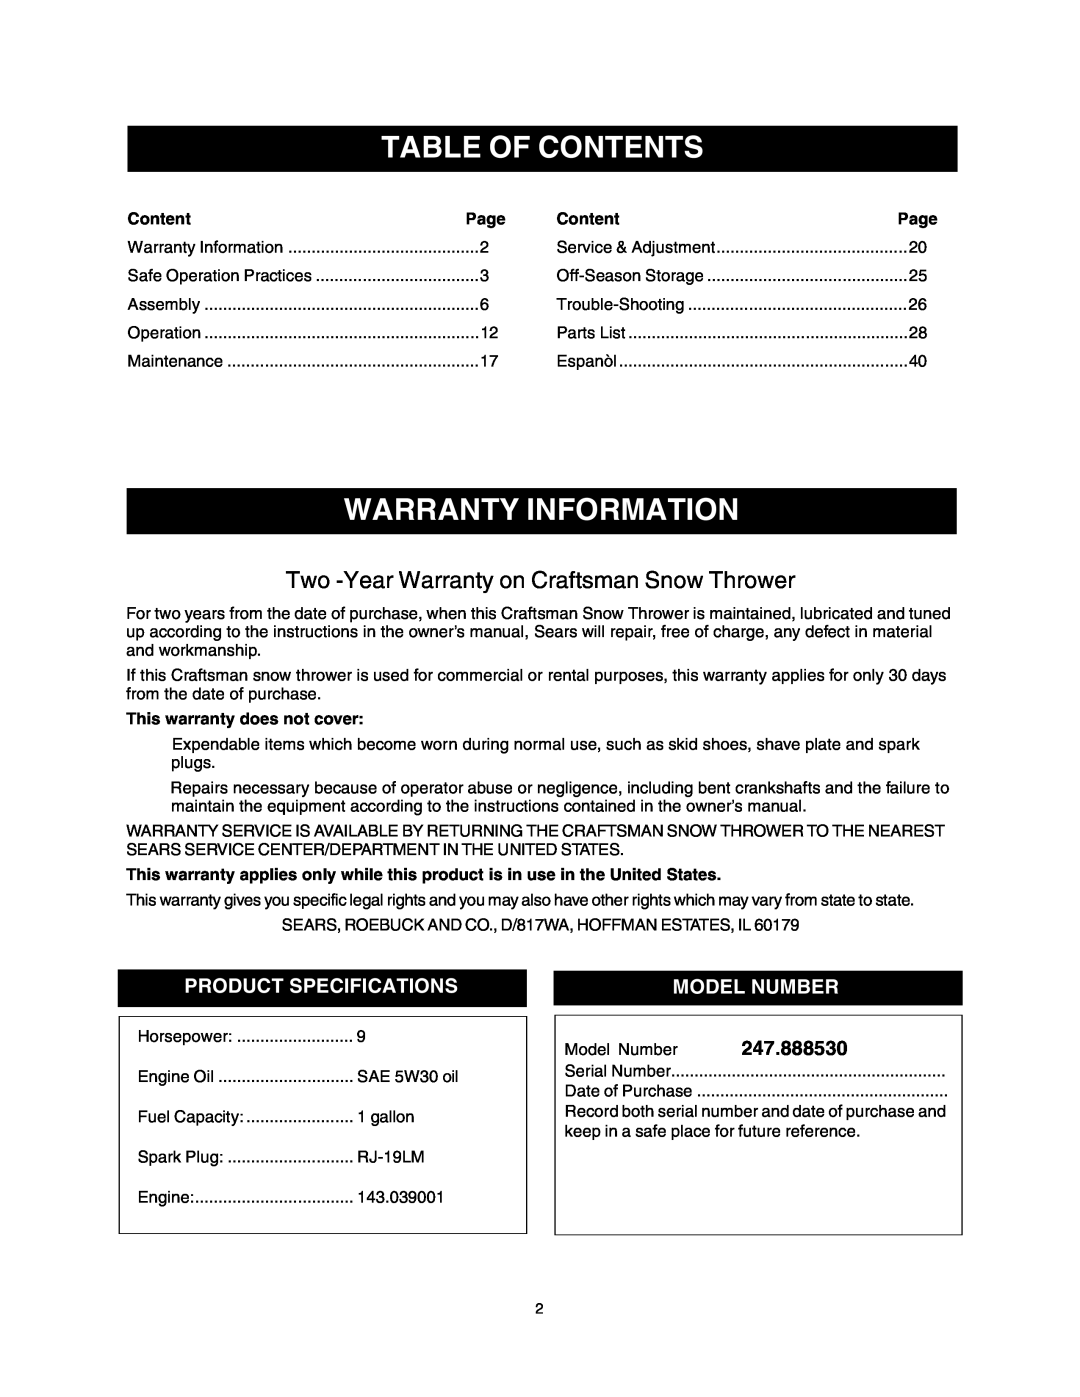 Sears owner manual Table Of Contents, Warranty Information, Product Specifications, Model Number, 247.888530 